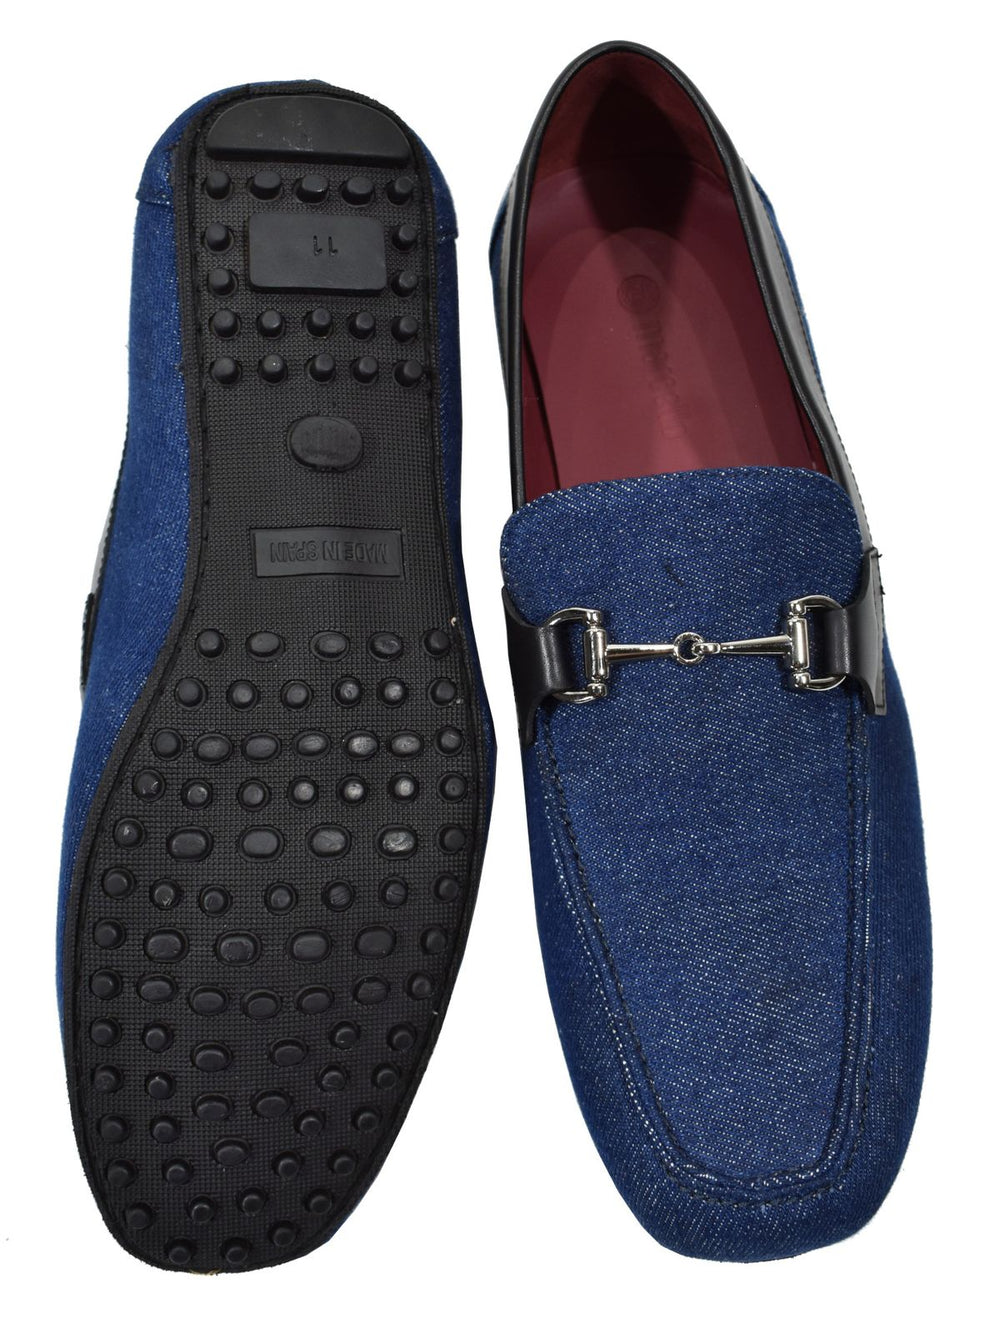 Send a fashion statement that is truly unique with our trend moccasin in denim blue fabric with leather trim and a sport rubber sole. The shoe fabric is denim jean fabric a gun metal accessory and comfort sole.  Classic fit, whole sizes only.  Designed and hand crafted in Spain. Shoe by Marcello.